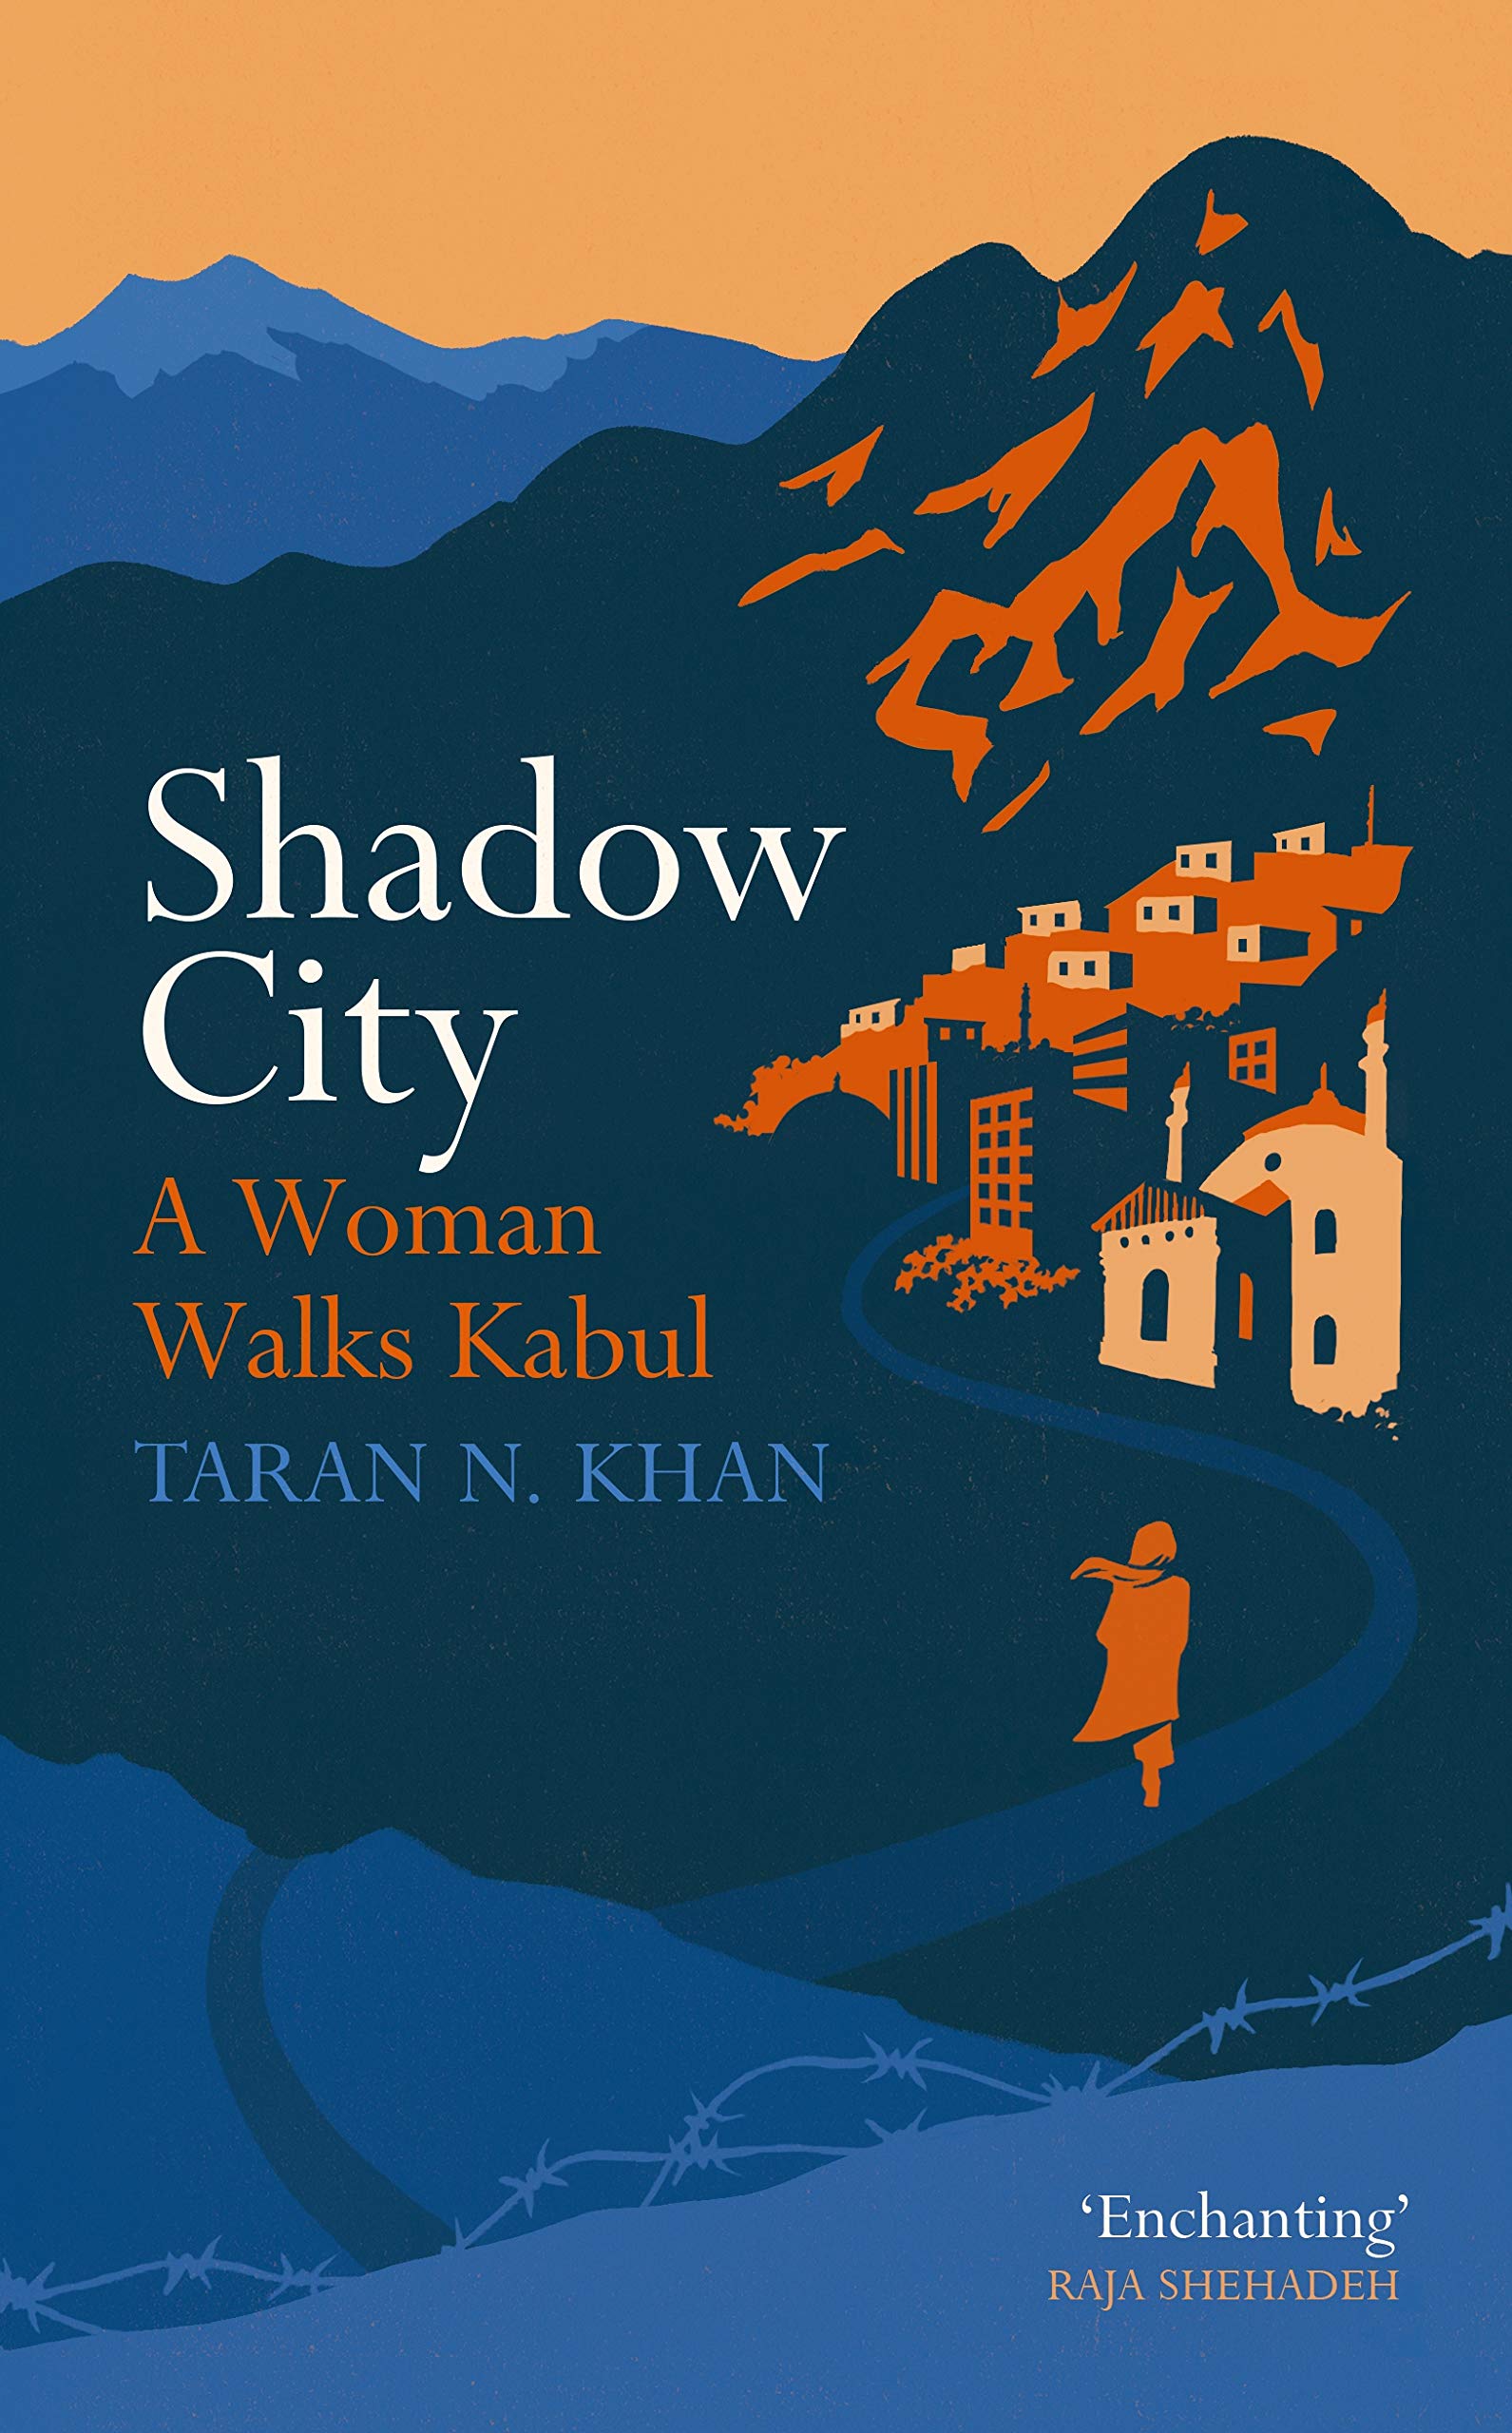 Cover of Taran Khan's "Shadow City" (published by Chatto &amp; Windus)